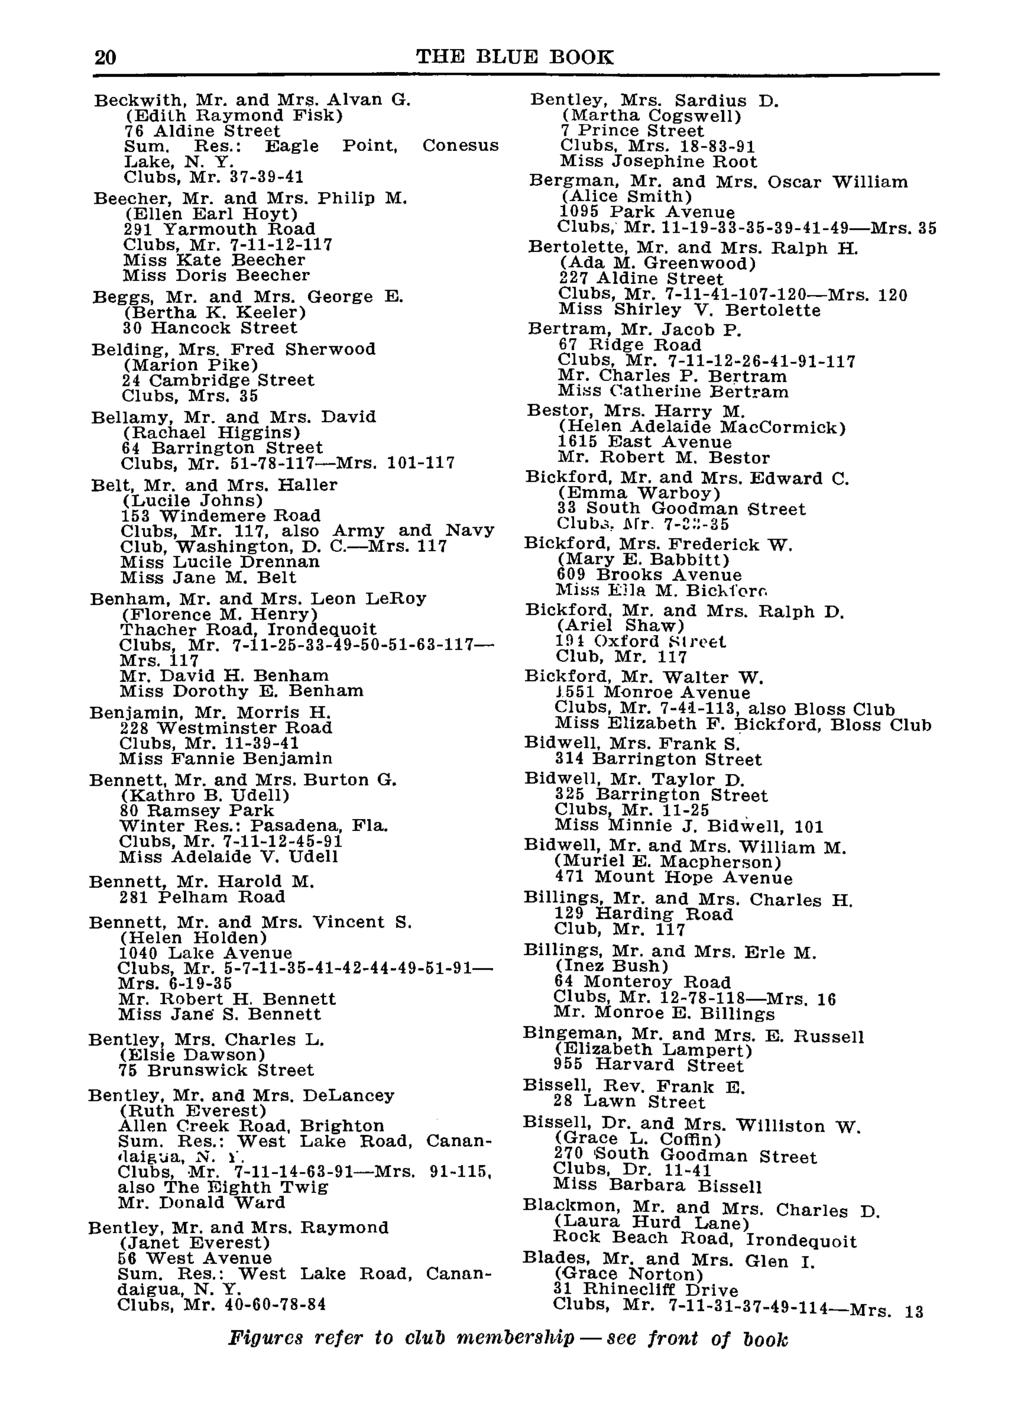 20 THE BLUE BOOK Beckwith, Mr. and Mrs. Alvan G. (Edith Raymond Fisk) 76 Aldine Street Bentley, Mrs. Sardius D. (Martha Cogswell) 7 Prince Street Sum. Res.: Eagle Point, Conesus Clubs, Mrs.